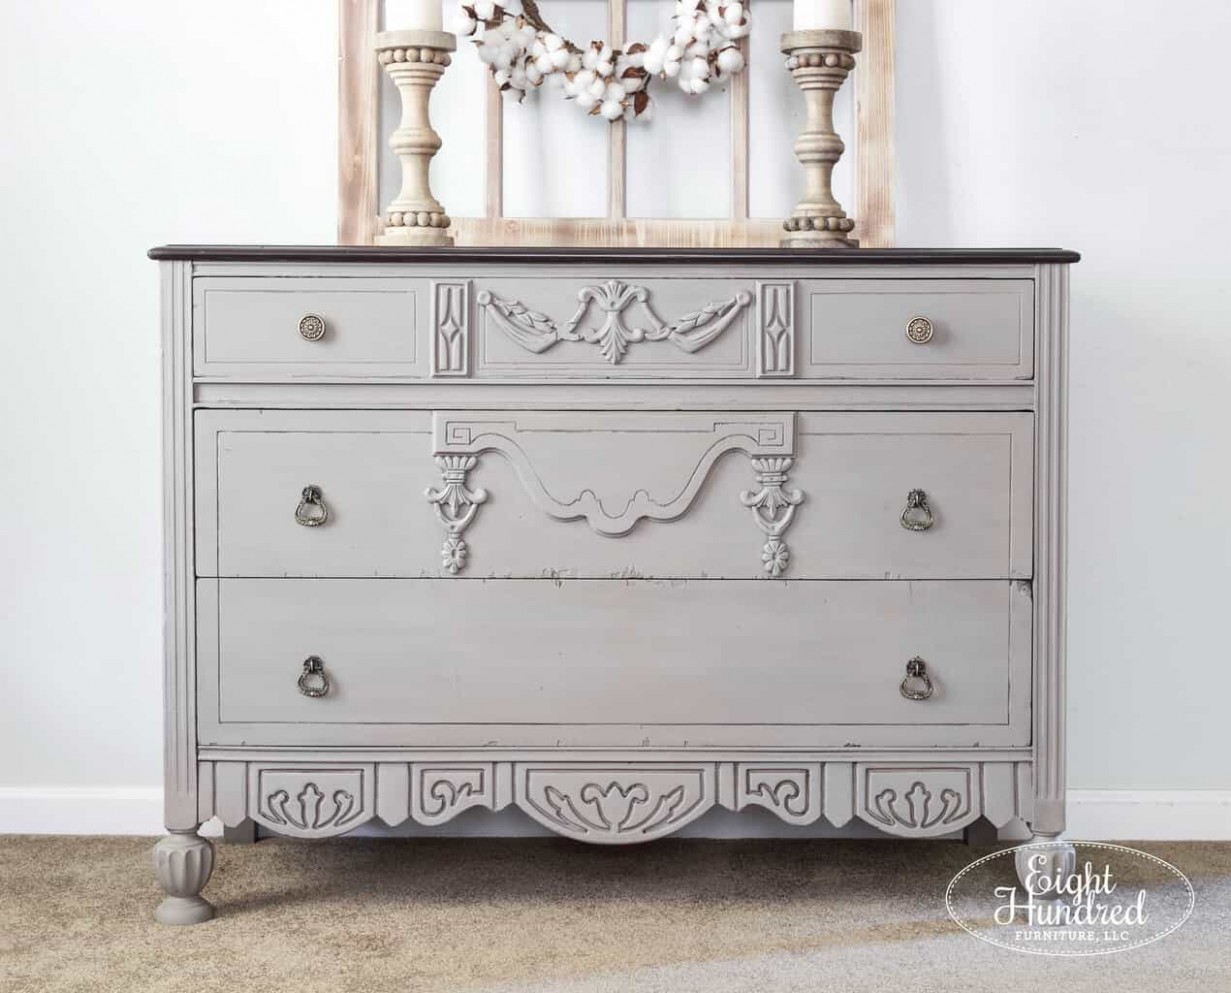 Repainting A Dresser In Chalk Paint® Eight Hundred Furniture Annie Sloan Chalk Paint For Sale